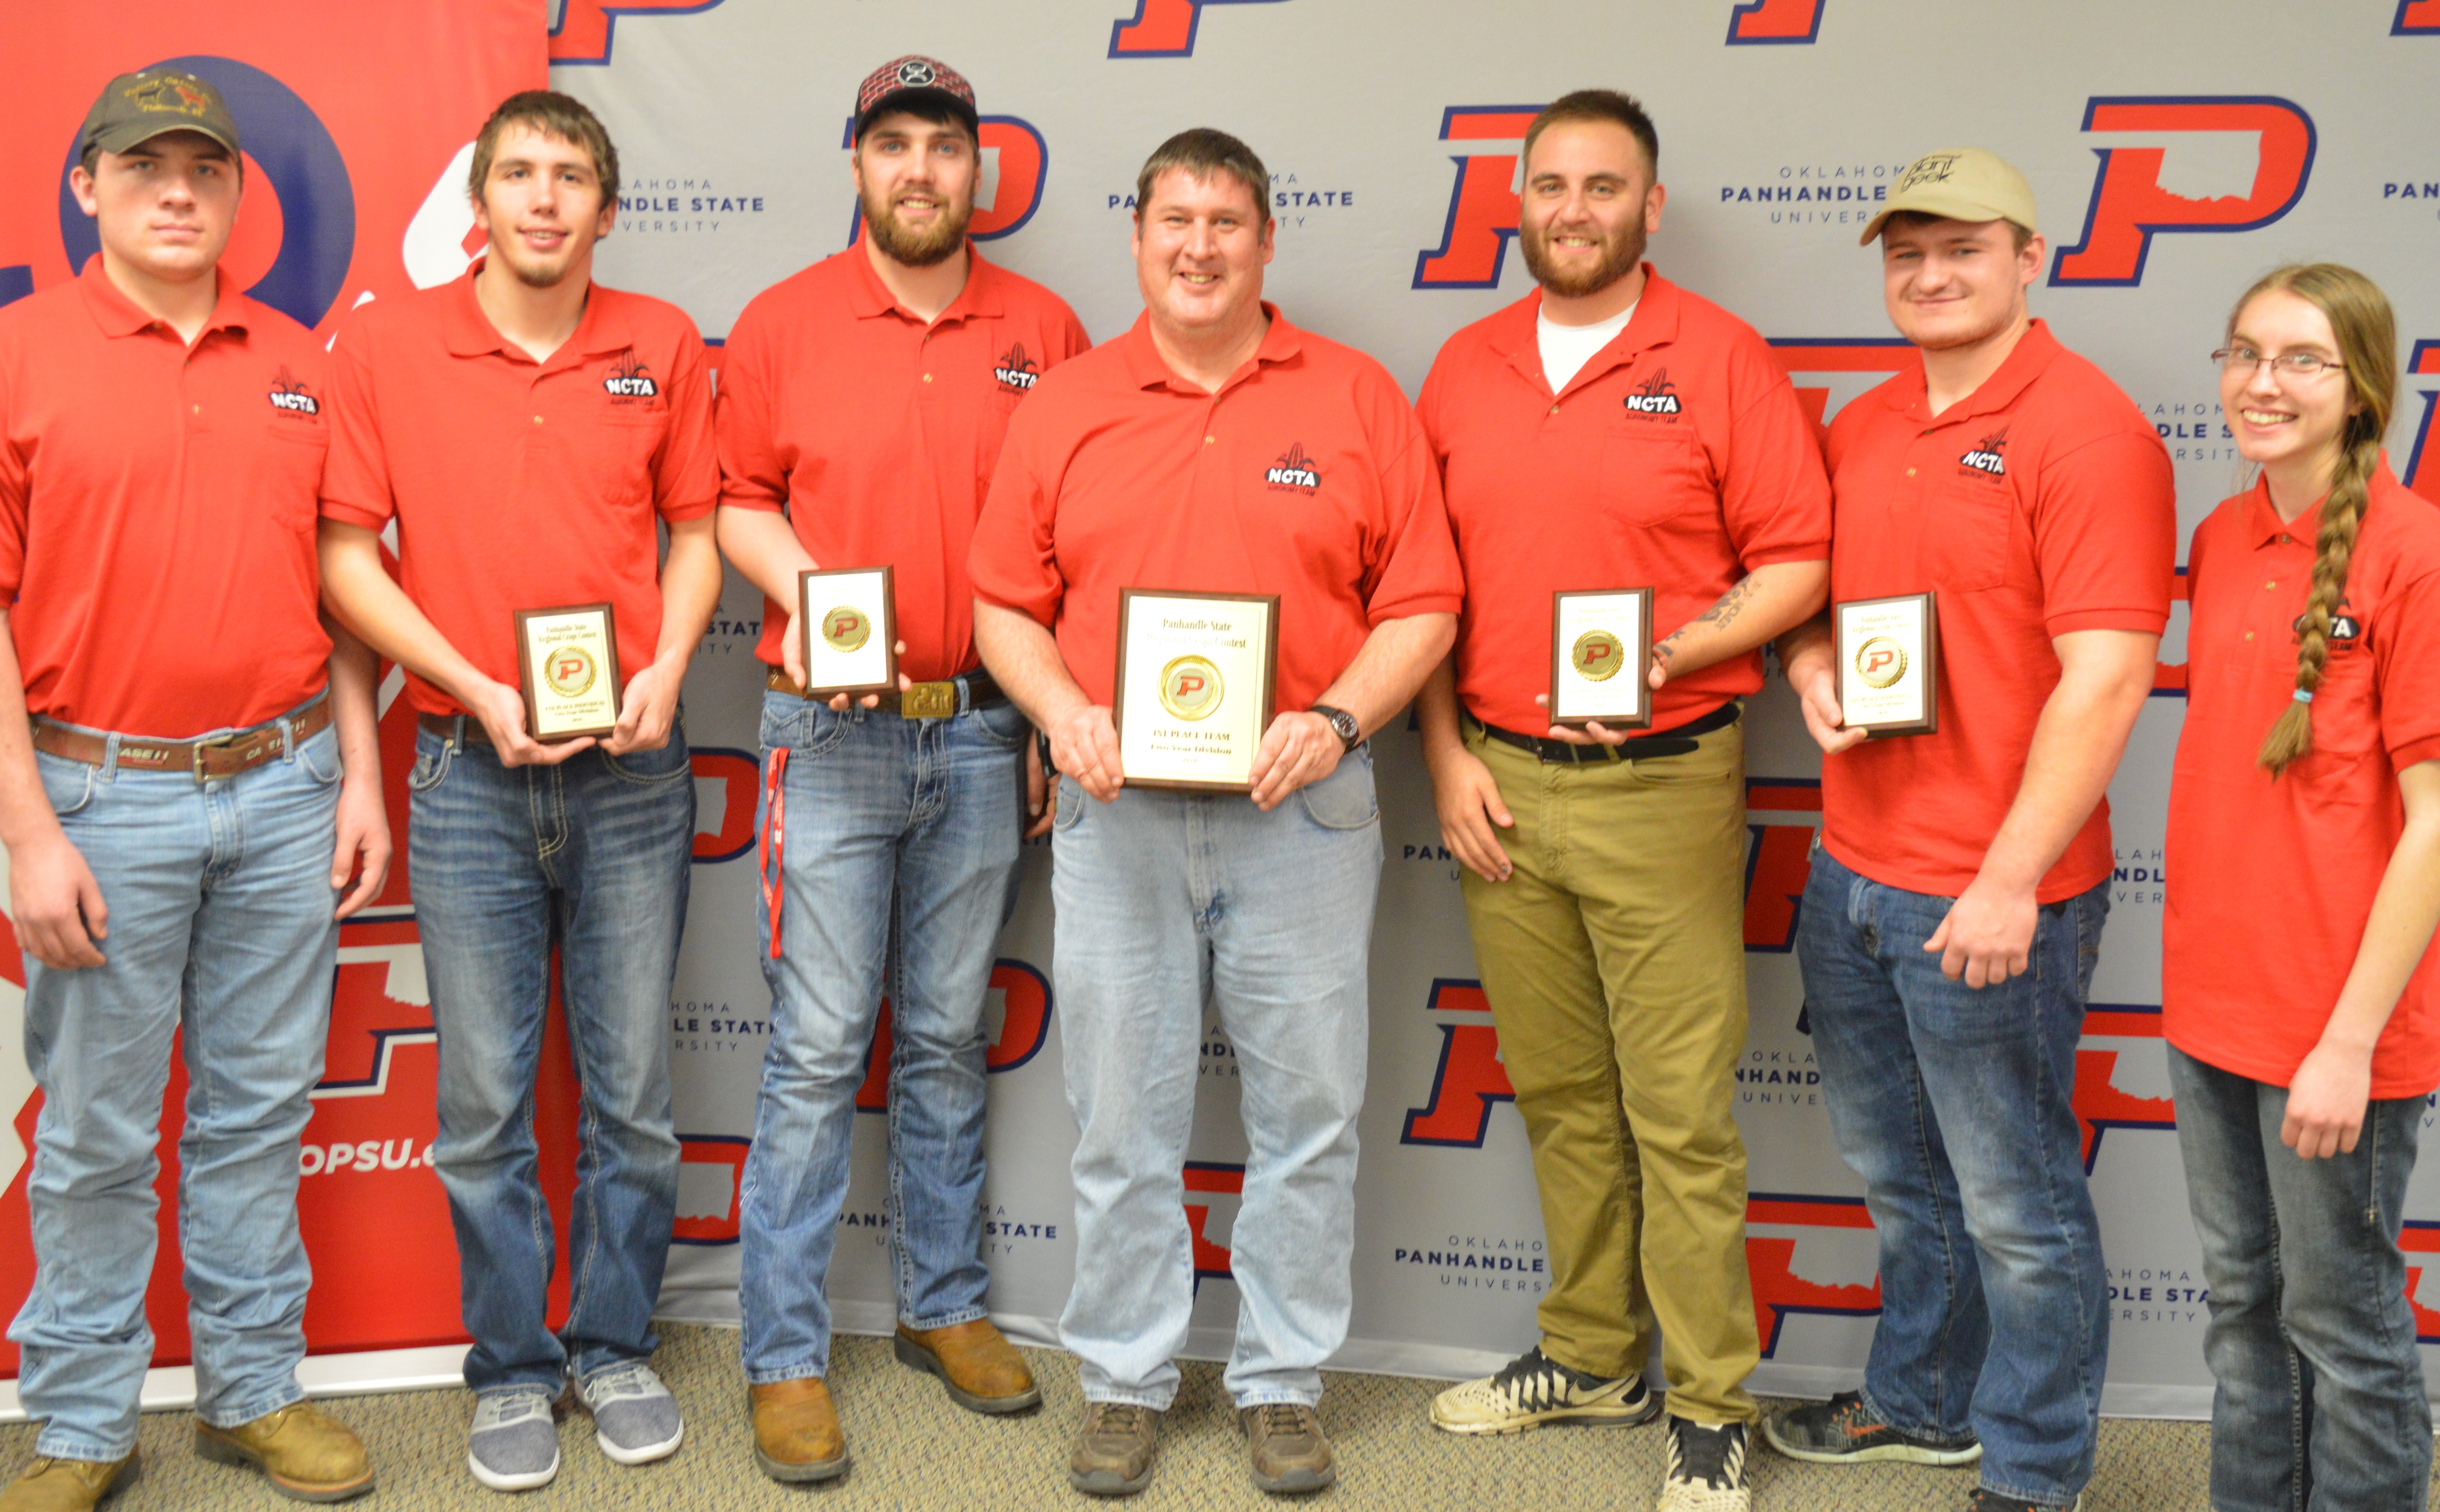 Agronomy team members flank their coach and instructor, Dr. Brad Ramsdale, after the NCTA Aggies won first place in a contest Saturday at Goodwell, Oklahoma. NCTA had the top four individuals, as well. From left, Jacob Valley, Plattsmouth; Lee Jespersen, Hemingford, tied for 3rd; Will Kusant, Comstock, 2nd; Coach Ramsdale with 1st place team plaque; Nate Montanez, Grand Island, 3rd tie; Dalon Koubek, North Platte, 1st place; and Catherine Ljunggren, Harvard. (Brent Thomas/NCTA News Photo)